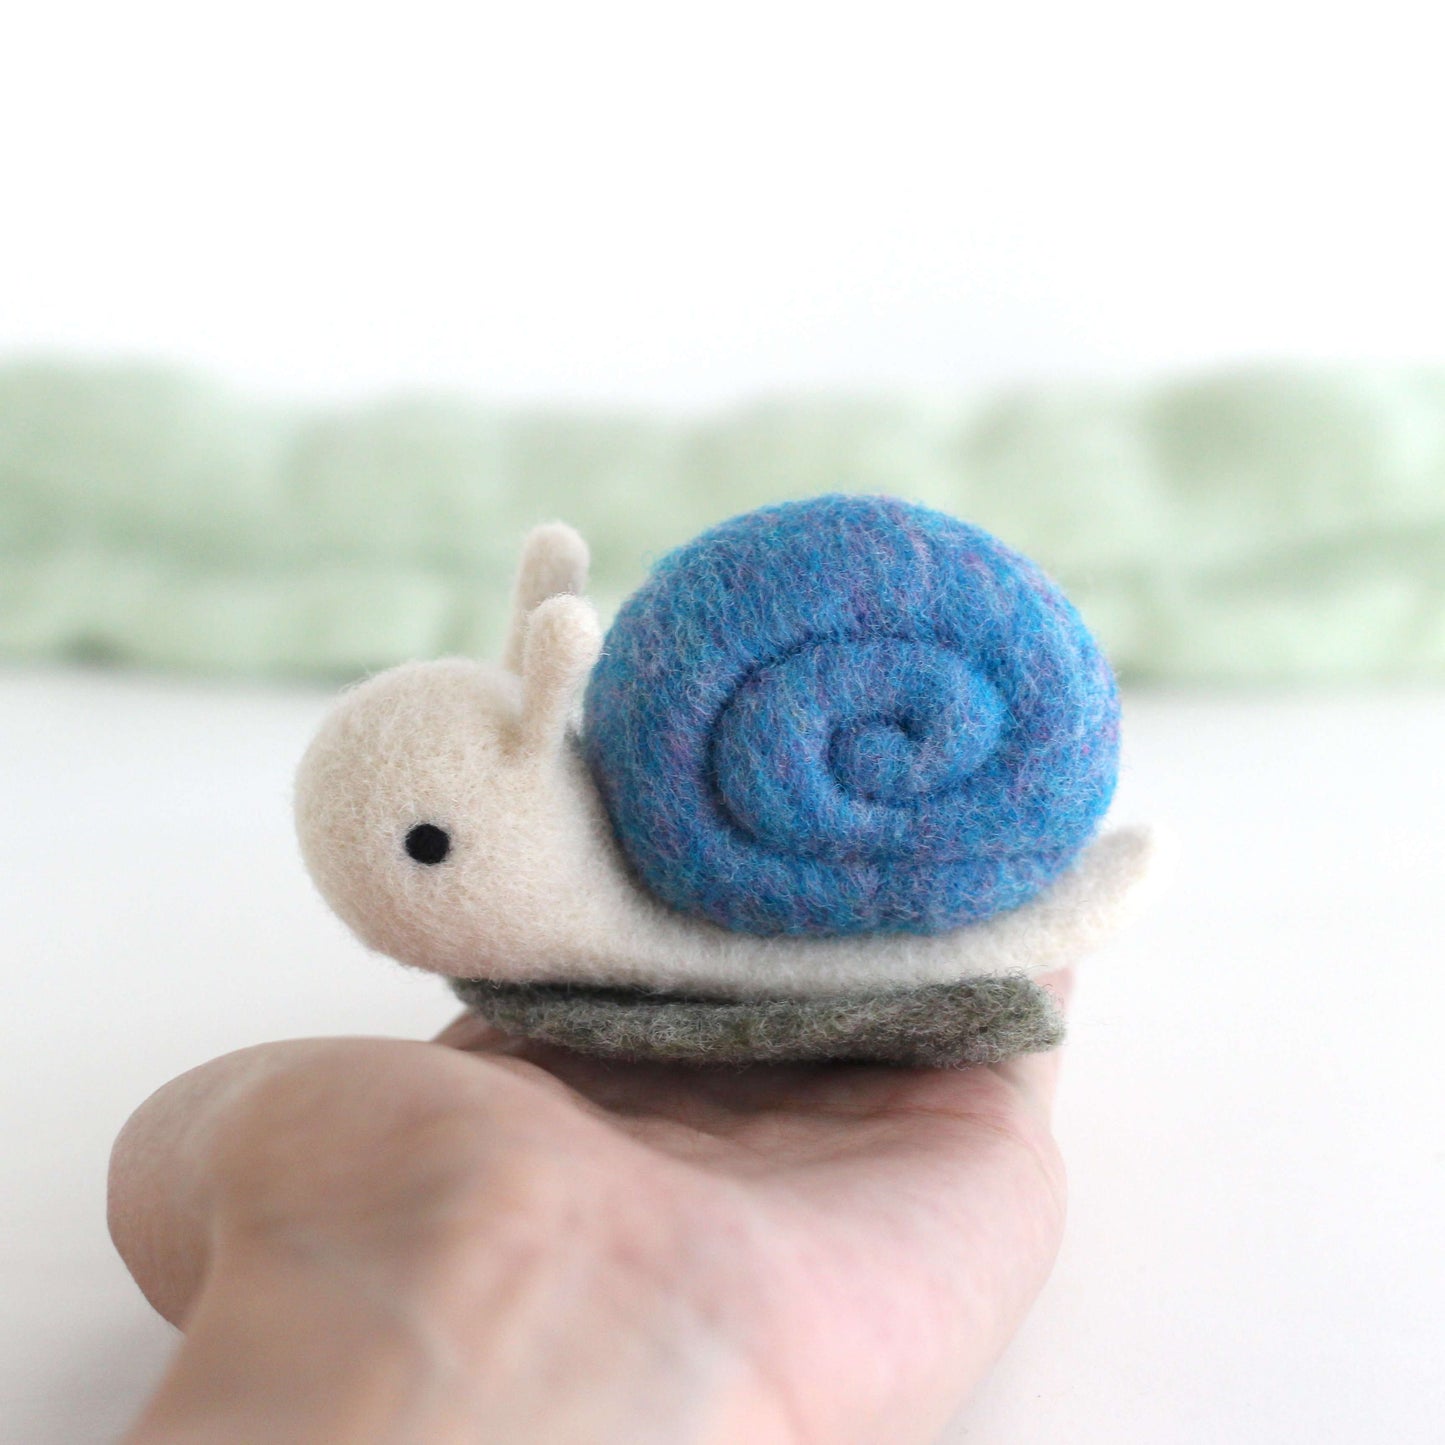 Needle Felted Snail on a Leaf (Blue) by Wild Whimsy Woolies